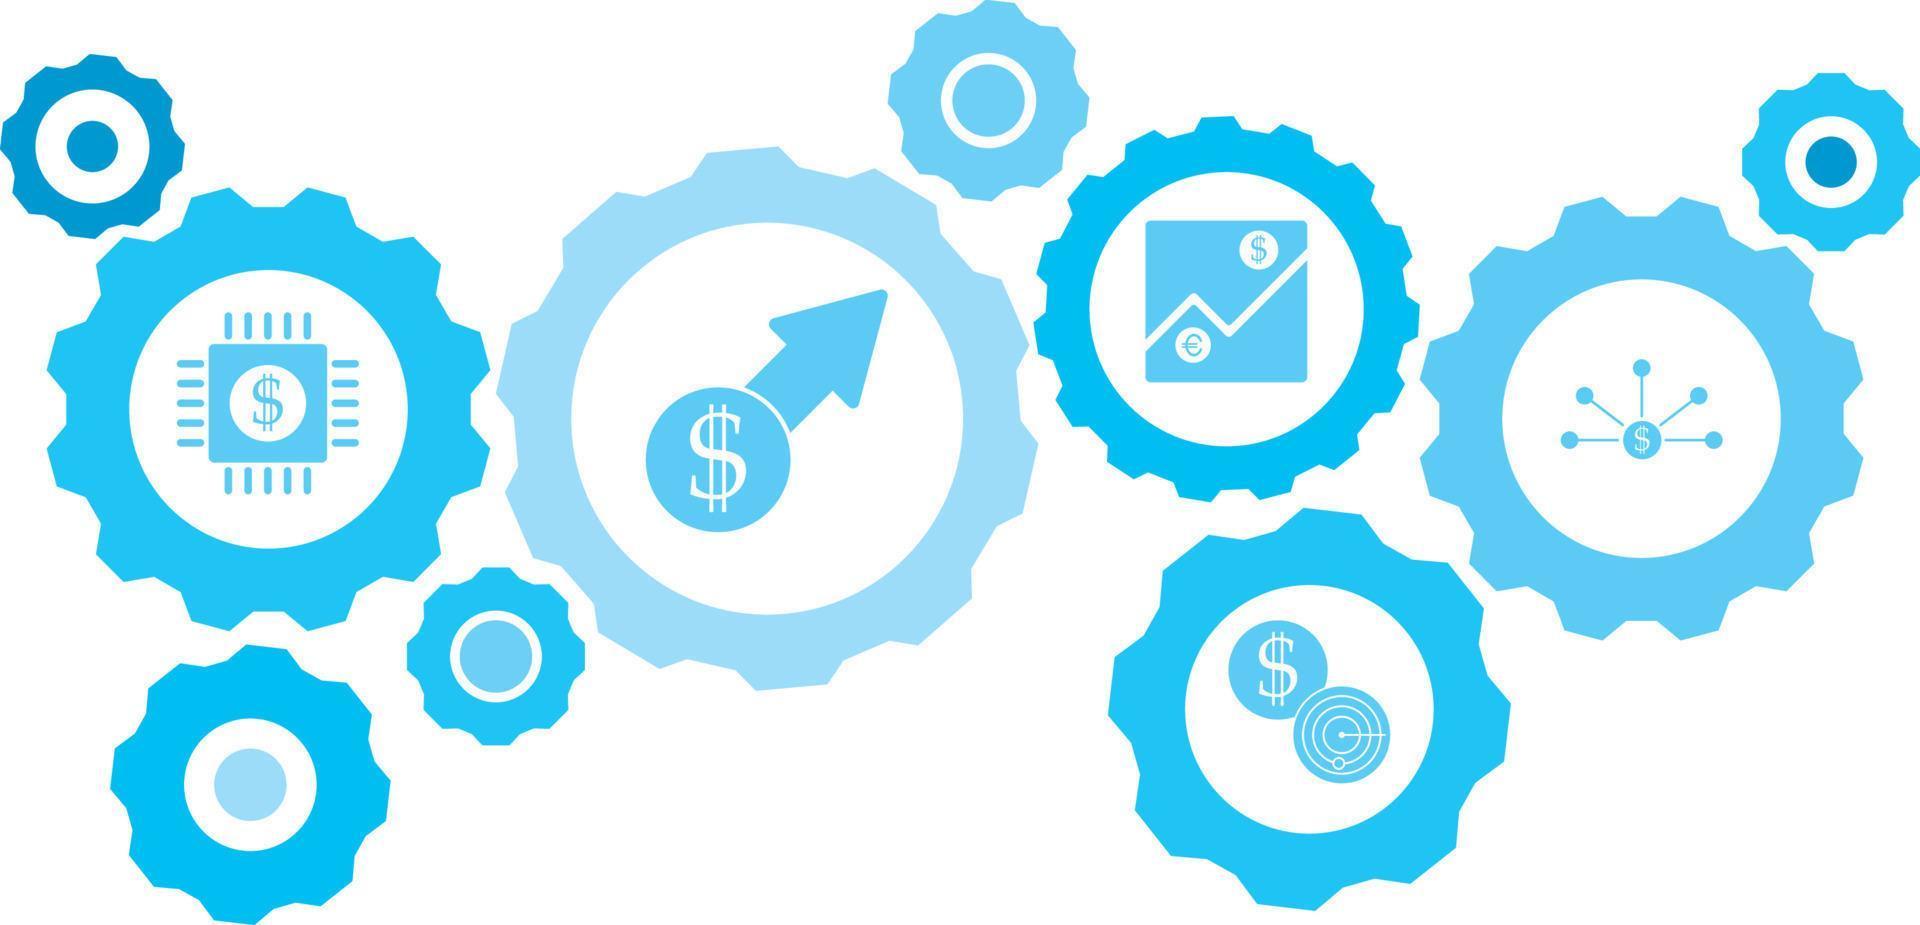 Connected gears and vector icons for logistic, service, shipping, distribution, transport, market, communicate concepts. gear blue icon setbusiness report, cashflow .